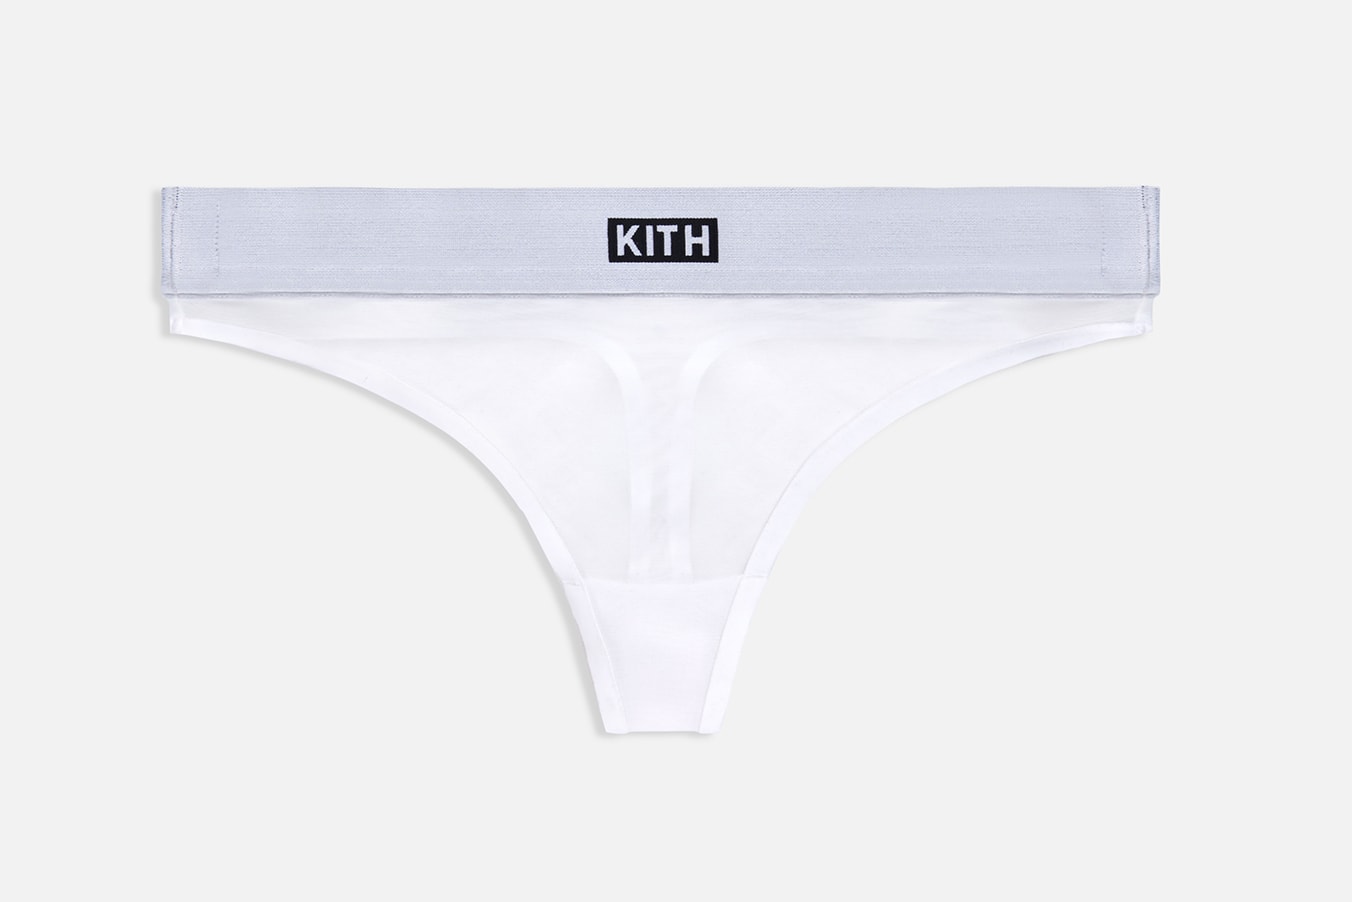 Every Item From KITH x Calvin Klein Collaboration | HYPEBAE